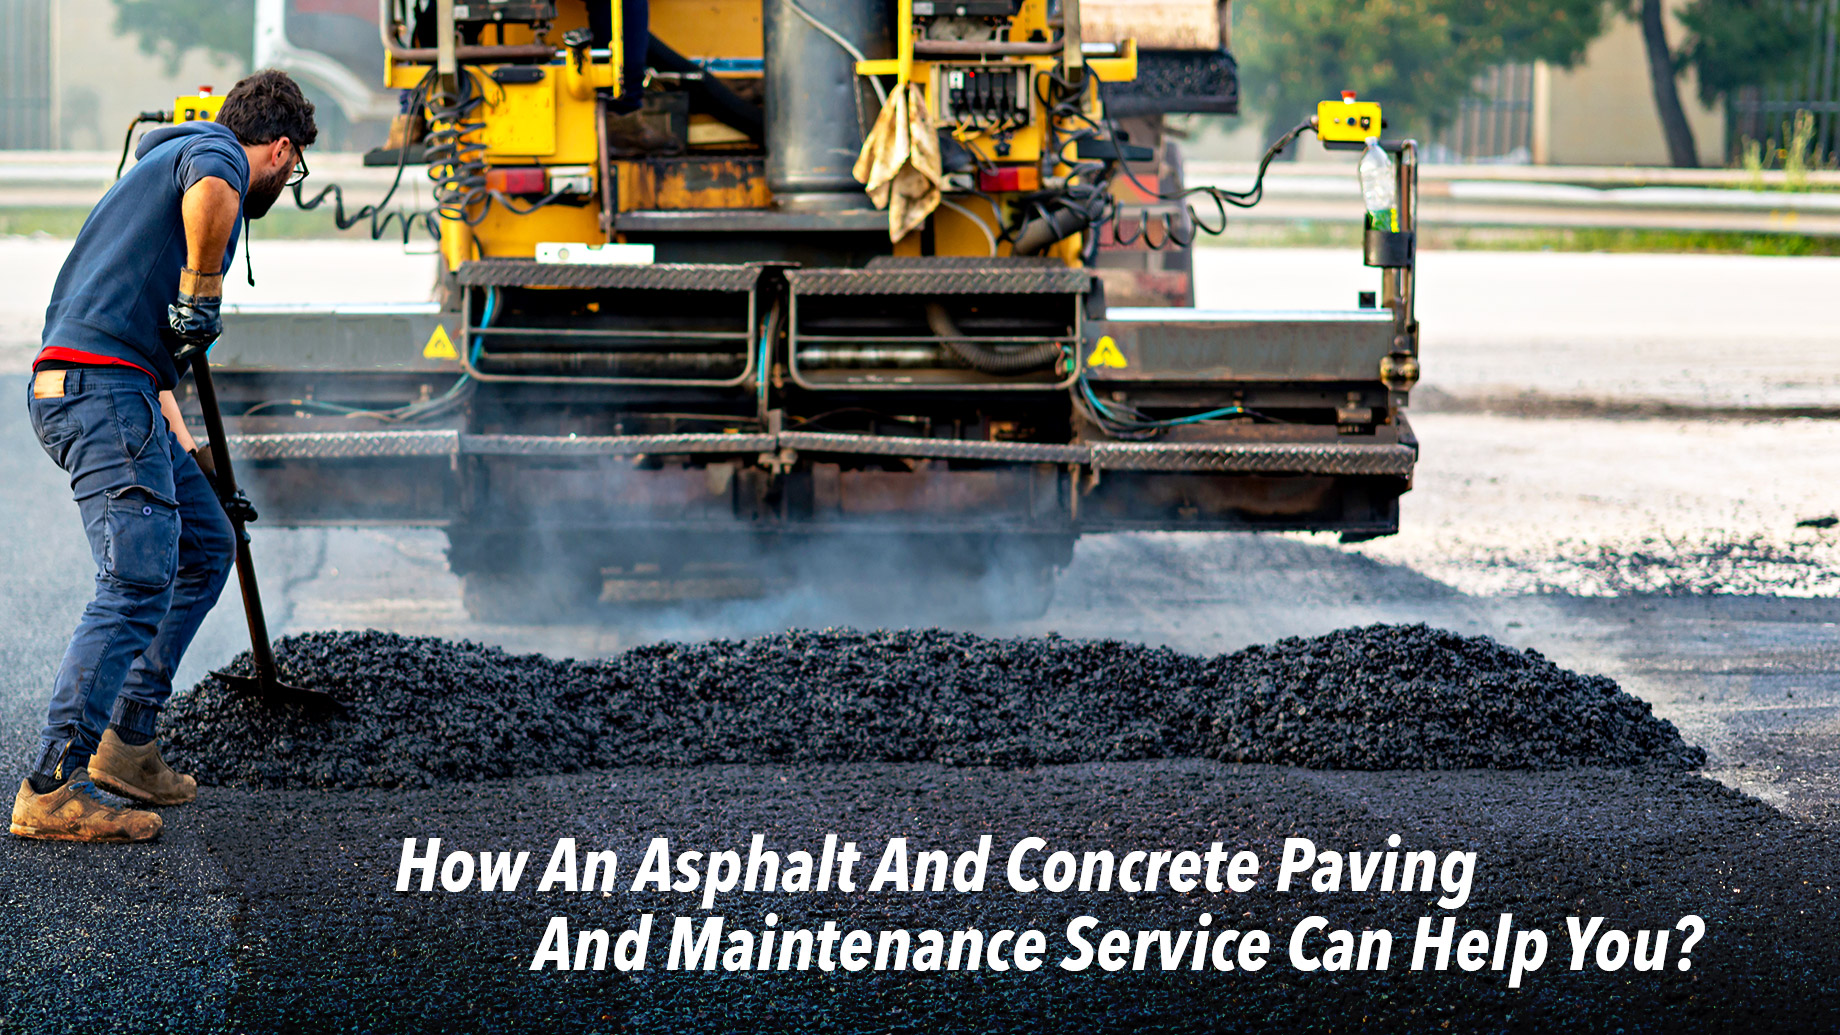 How An Asphalt And Concrete Paving And Maintenance Service Can Help You?